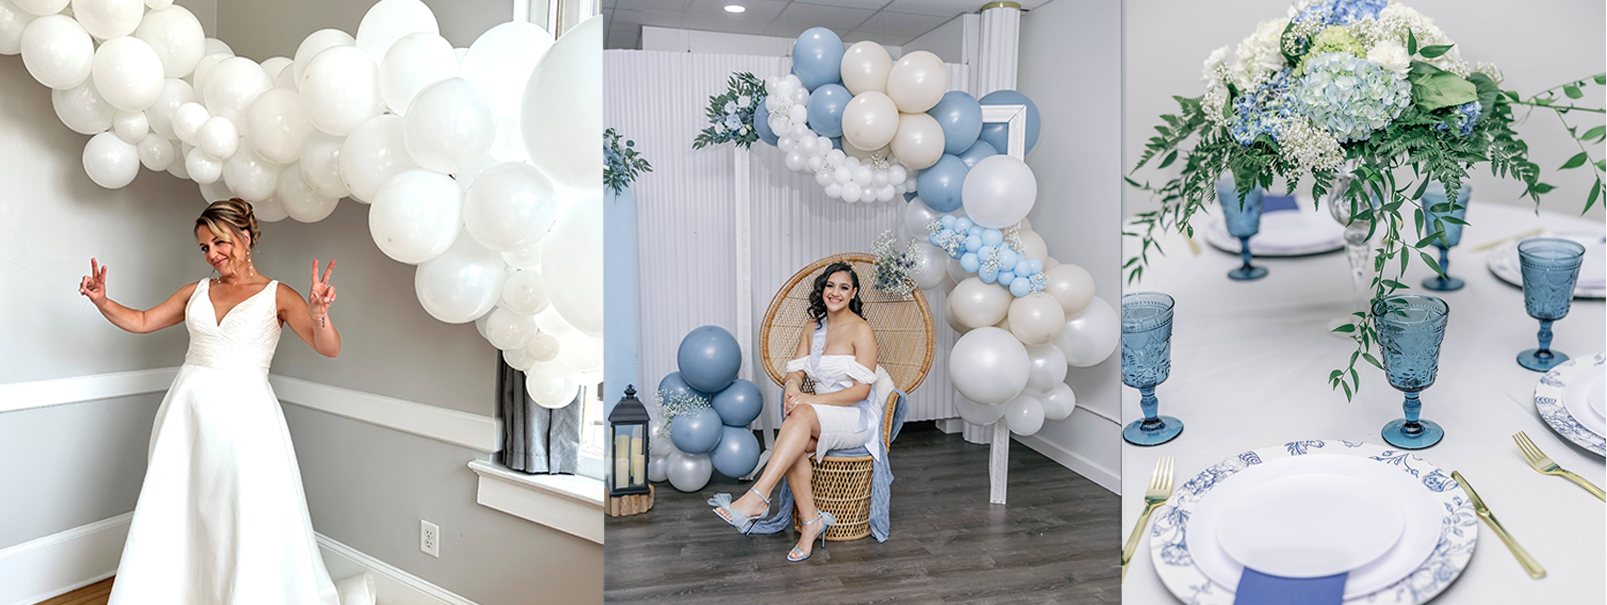 Introducing Caliella, your go-to for unforgettable bridal design and planning. From bridal showers to bachelorette parties, our creative services will make your special day truly memorable.